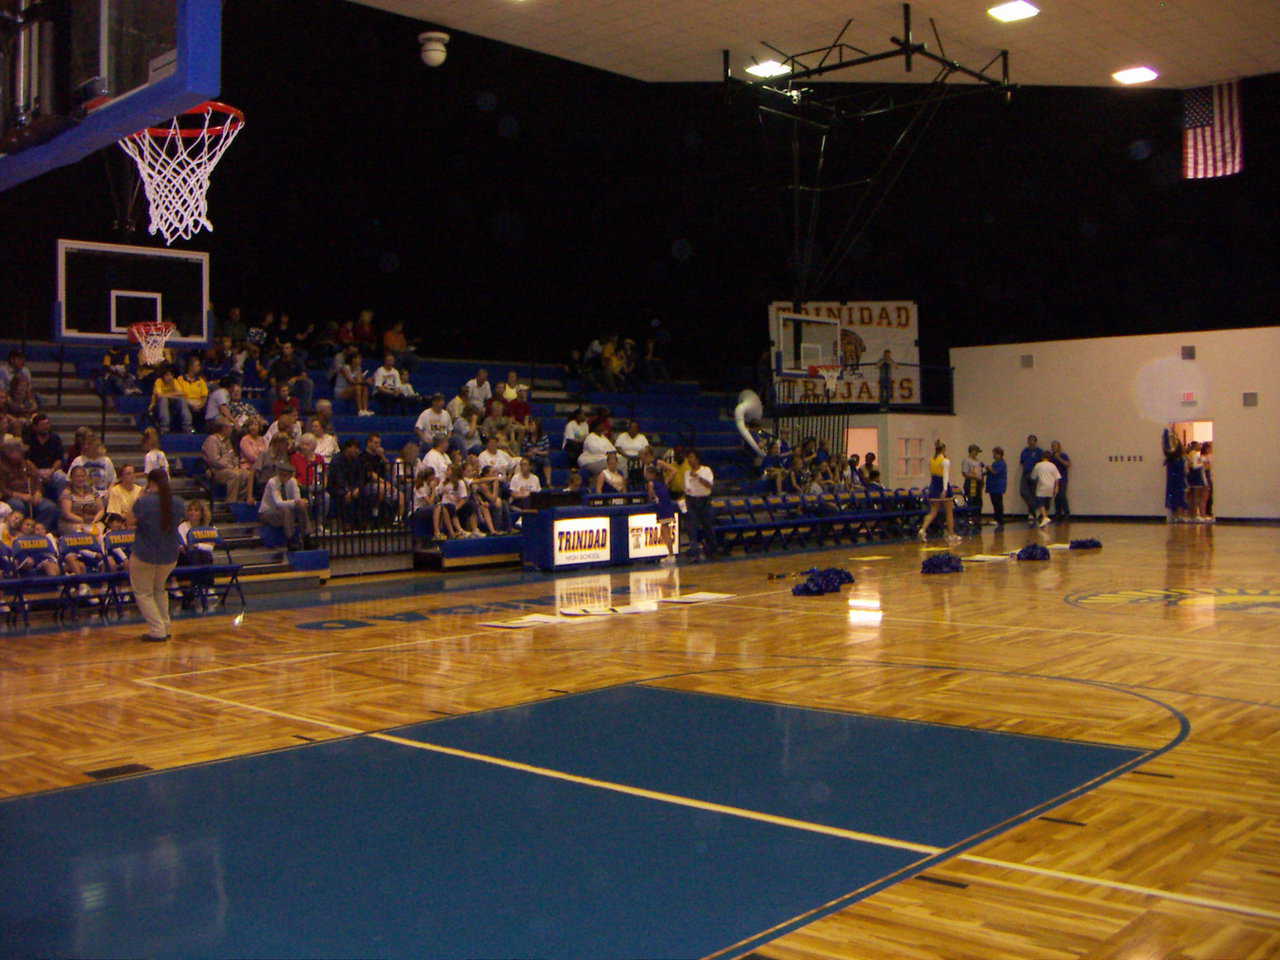 This Monolithic Dome is not only a great basketball facility but is very nice for concerts, assemblies, graduations, etc.